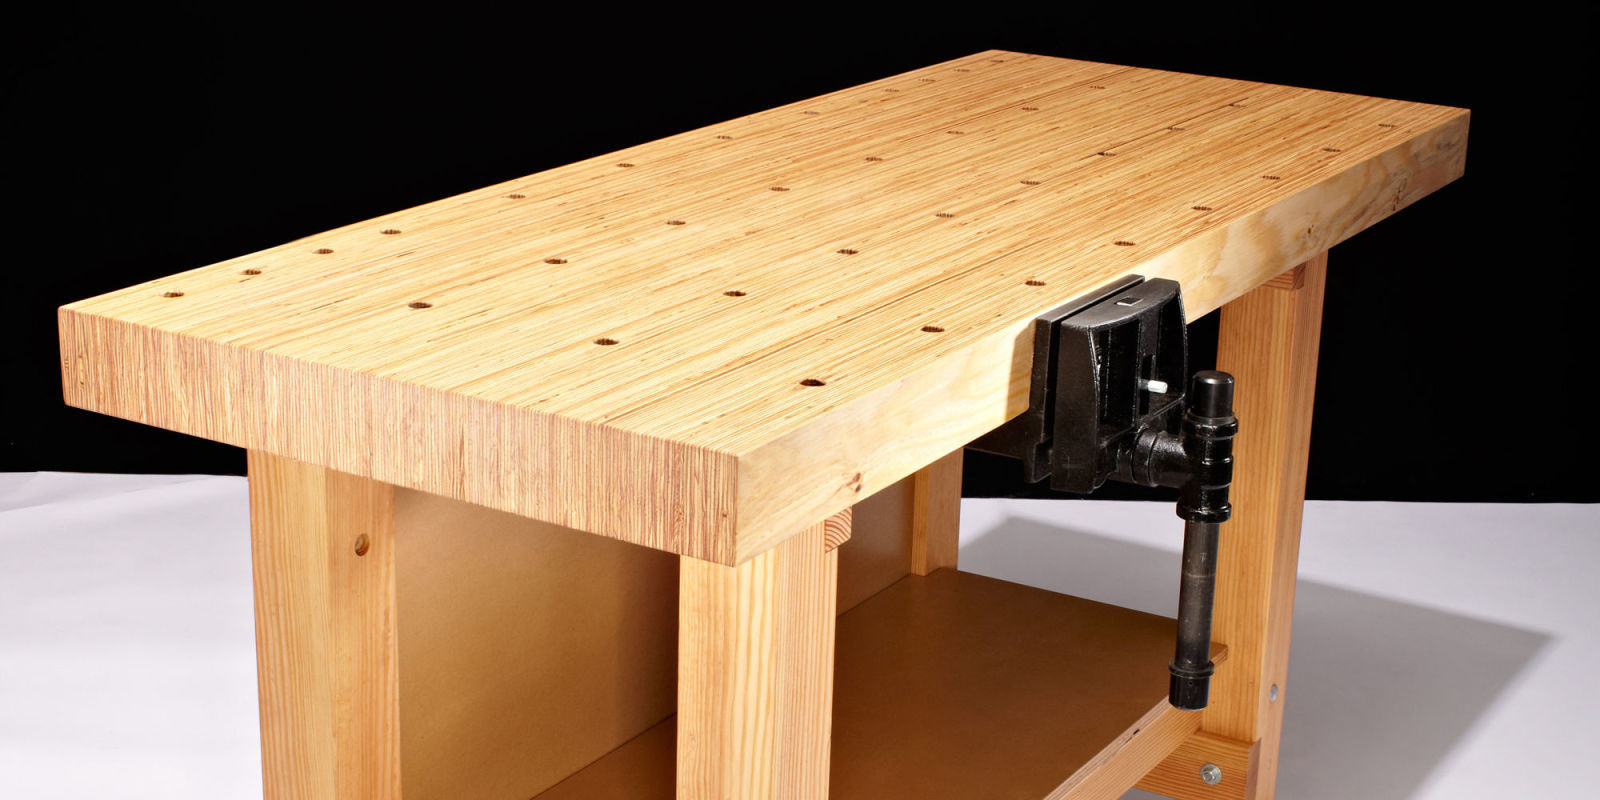 Wood Work Bench DIY
 How to Build This DIY Workbench